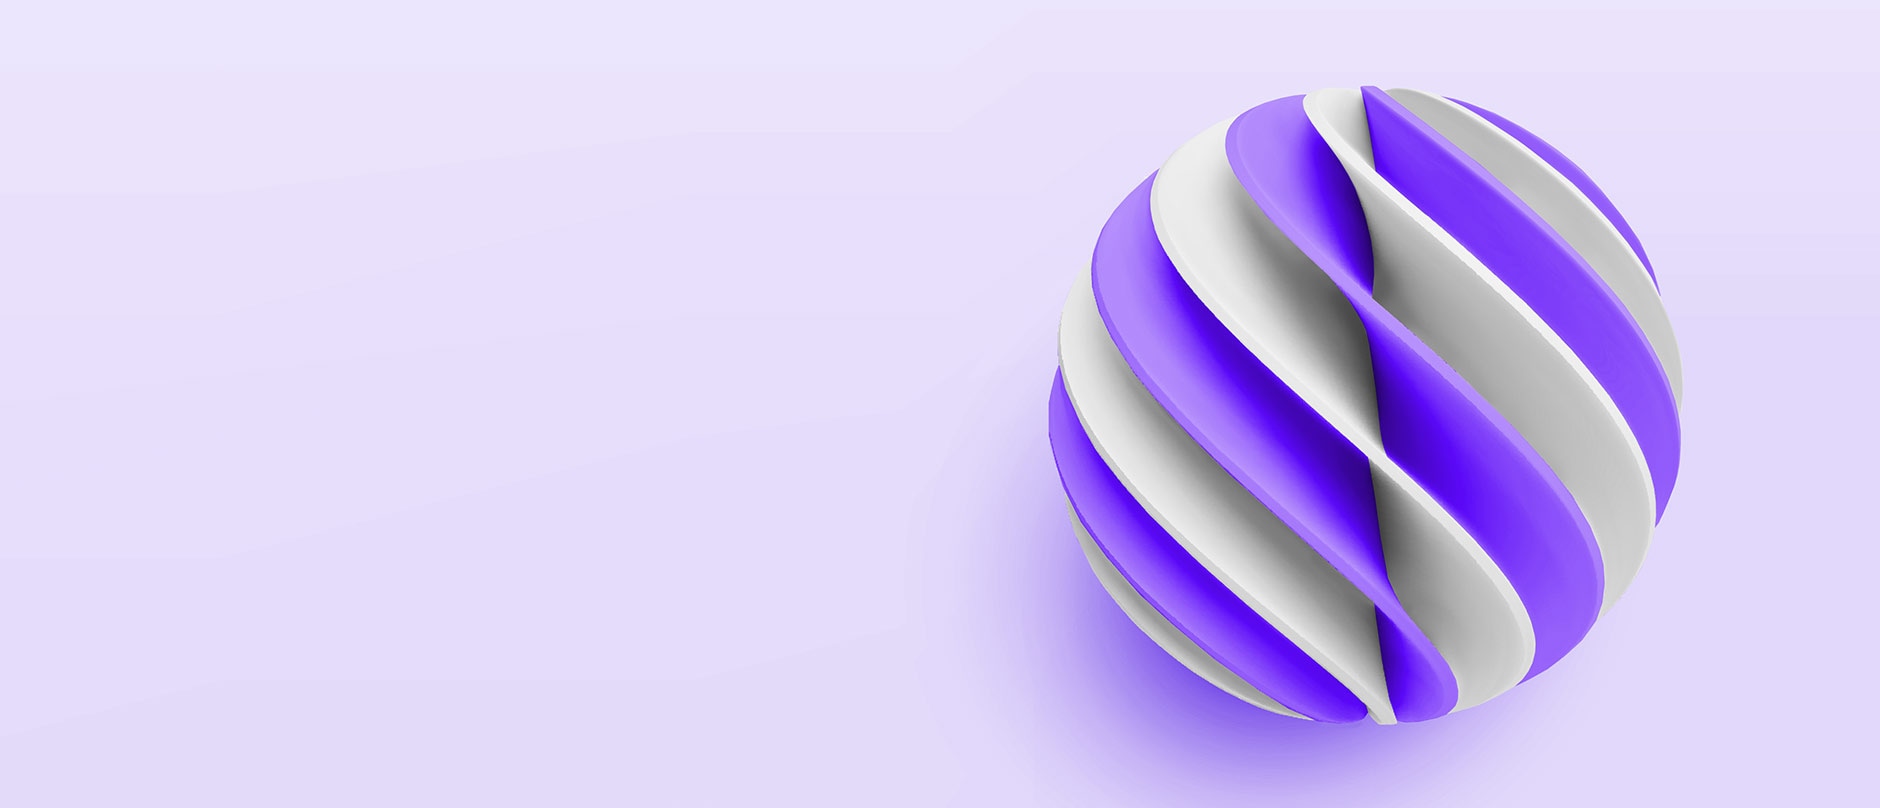 sphere made up of white and purple streaks on a purple background